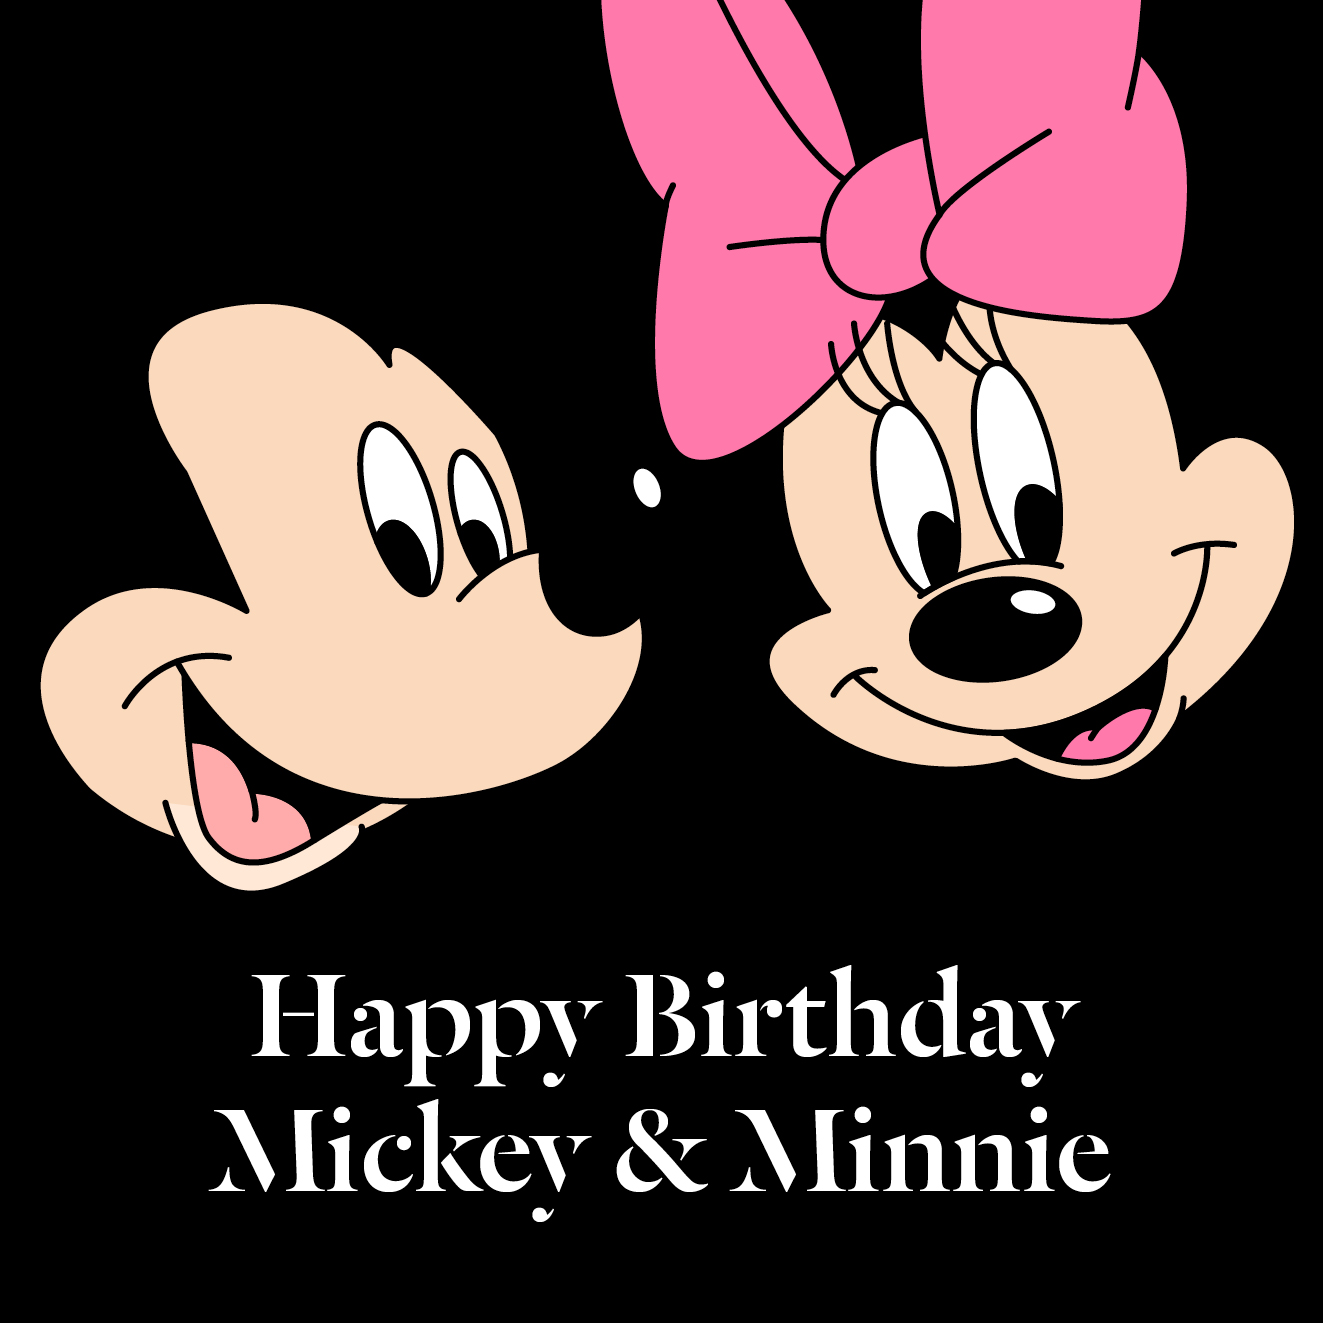 Mickey Mouse is turning 90!